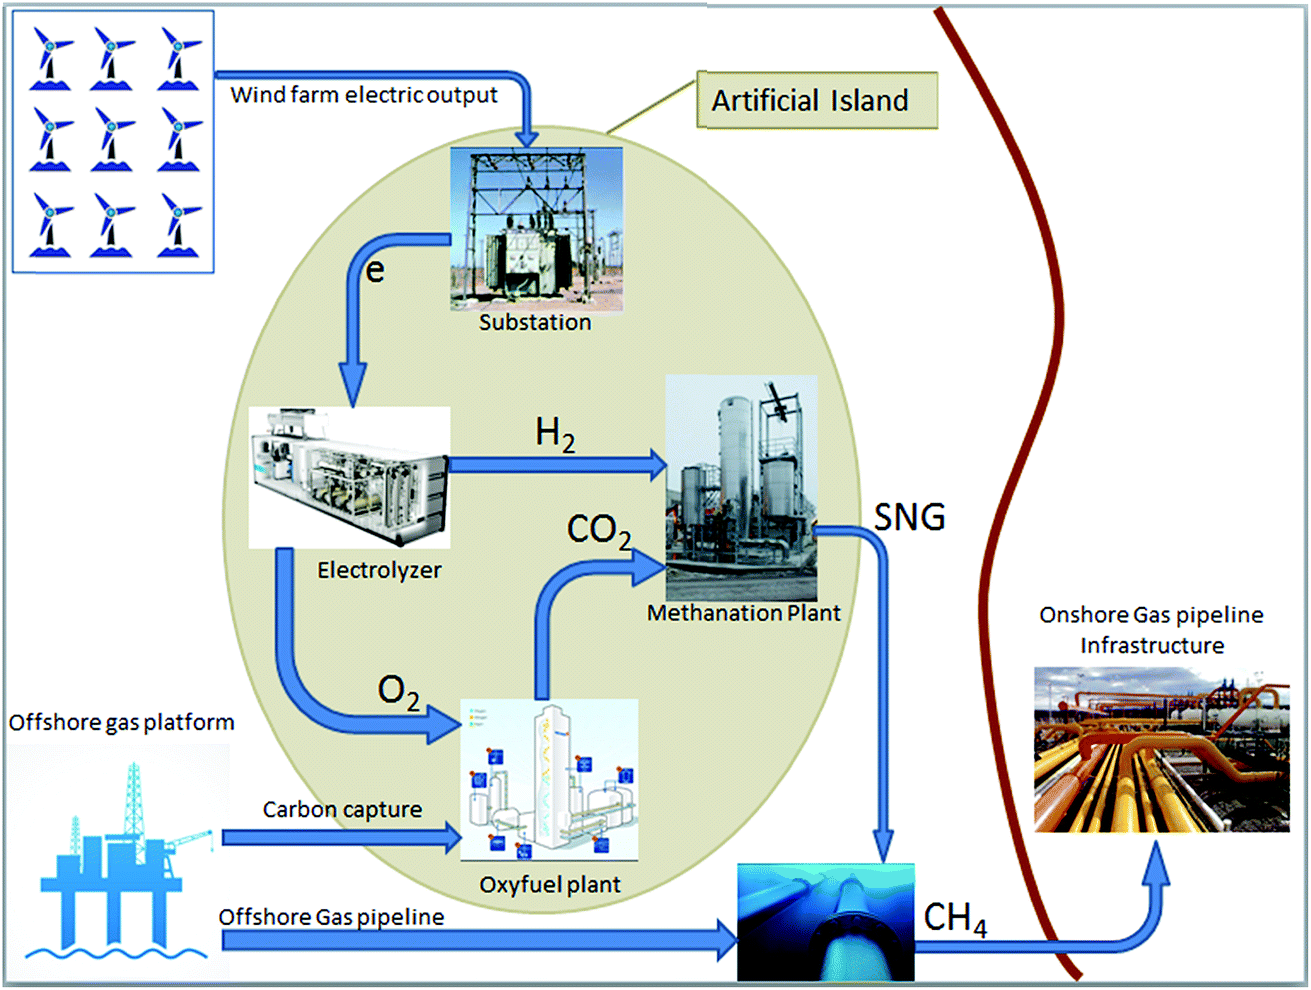 Offshore renewable energy resources and their potential in a green hydrogen  supply chain through power-to-gas - Sustainable Energy & Fuels (RSC  Publishing) DOI:10.1039/C8SE00544C